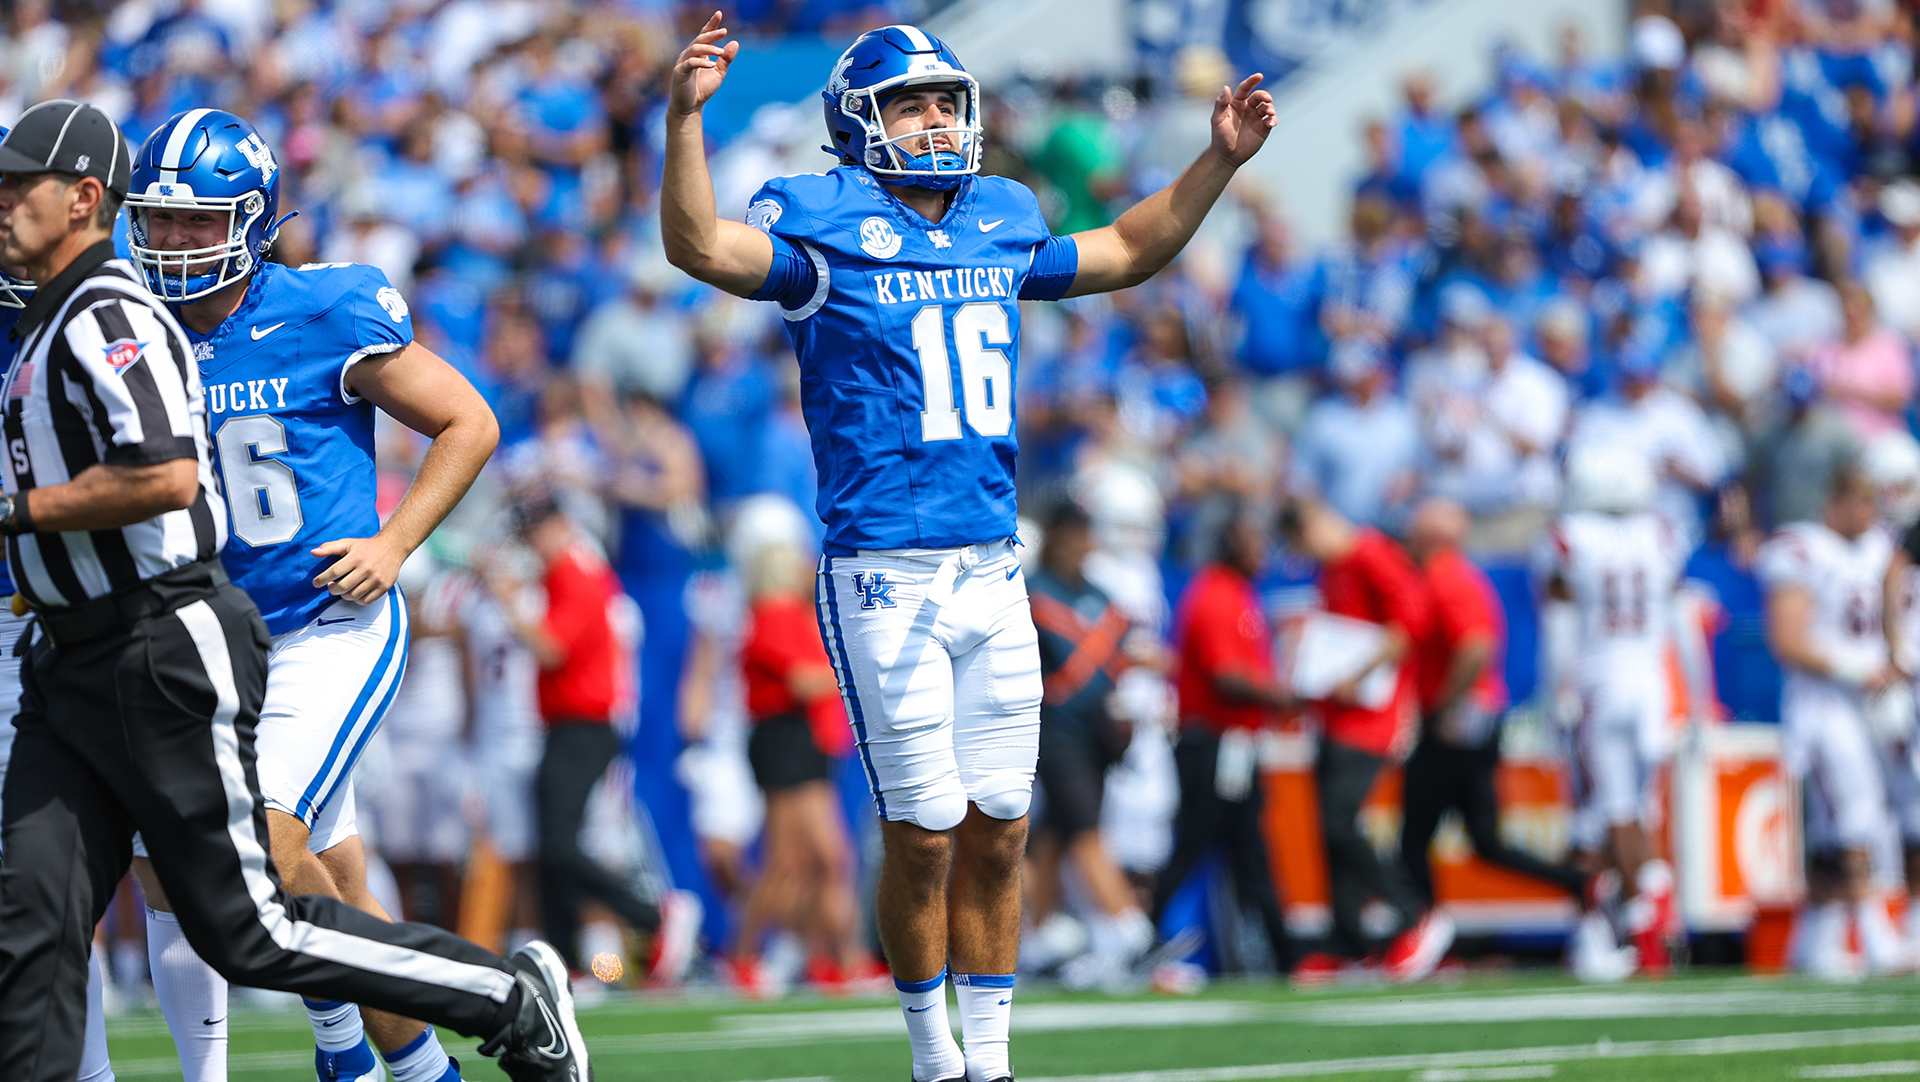 Kentucky Special Teams Live Up to Their Name on Saturday